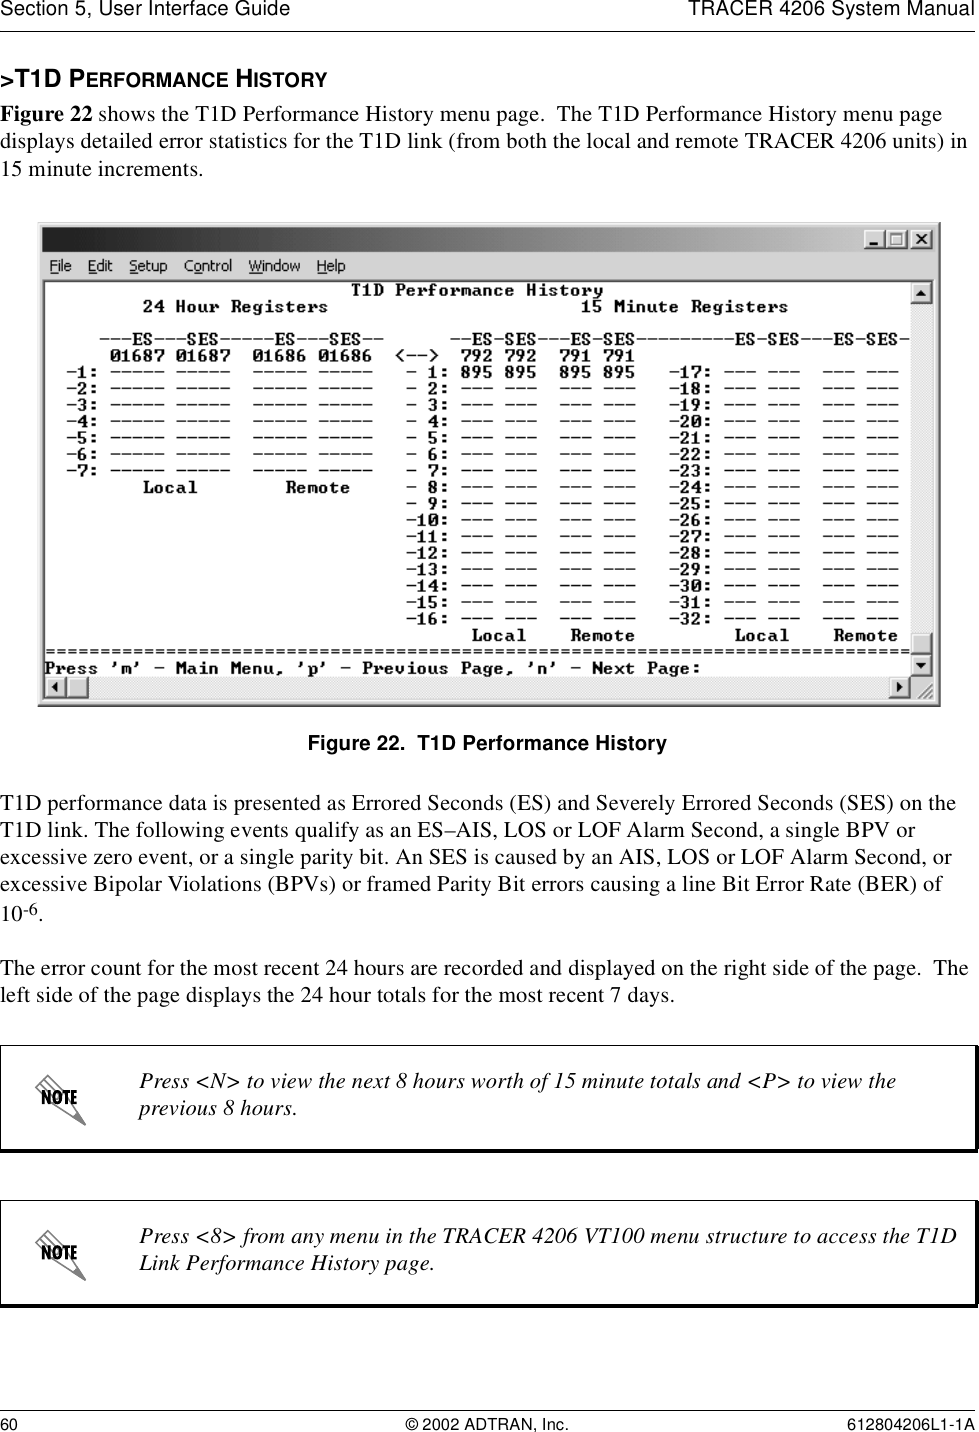 Section 5, User Interface Guide TRACER 4206 System Manual60 © 2002 ADTRAN, Inc. 612804206L1-1A&gt;T1D PERFORMANCE HISTORYFigure 22 shows the T1D Performance History menu page.  The T1D Performance History menu page displays detailed error statistics for the T1D link (from both the local and remote TRACER 4206 units) in 15 minute increments. Figure 22.  T1D Performance HistoryT1D performance data is presented as Errored Seconds (ES) and Severely Errored Seconds (SES) on the T1D link. The following events qualify as an ES–AIS, LOS or LOF Alarm Second, a single BPV or excessive zero event, or a single parity bit. An SES is caused by an AIS, LOS or LOF Alarm Second, or excessive Bipolar Violations (BPVs) or framed Parity Bit errors causing a line Bit Error Rate (BER) of 10-6.The error count for the most recent 24 hours are recorded and displayed on the right side of the page.  The left side of the page displays the 24 hour totals for the most recent 7 days.Press &lt;N&gt; to view the next 8 hours worth of 15 minute totals and &lt;P&gt; to view the previous 8 hours.Press &lt;8&gt; from any menu in the TRACER 4206 VT100 menu structure to access the T1D Link Performance History page.